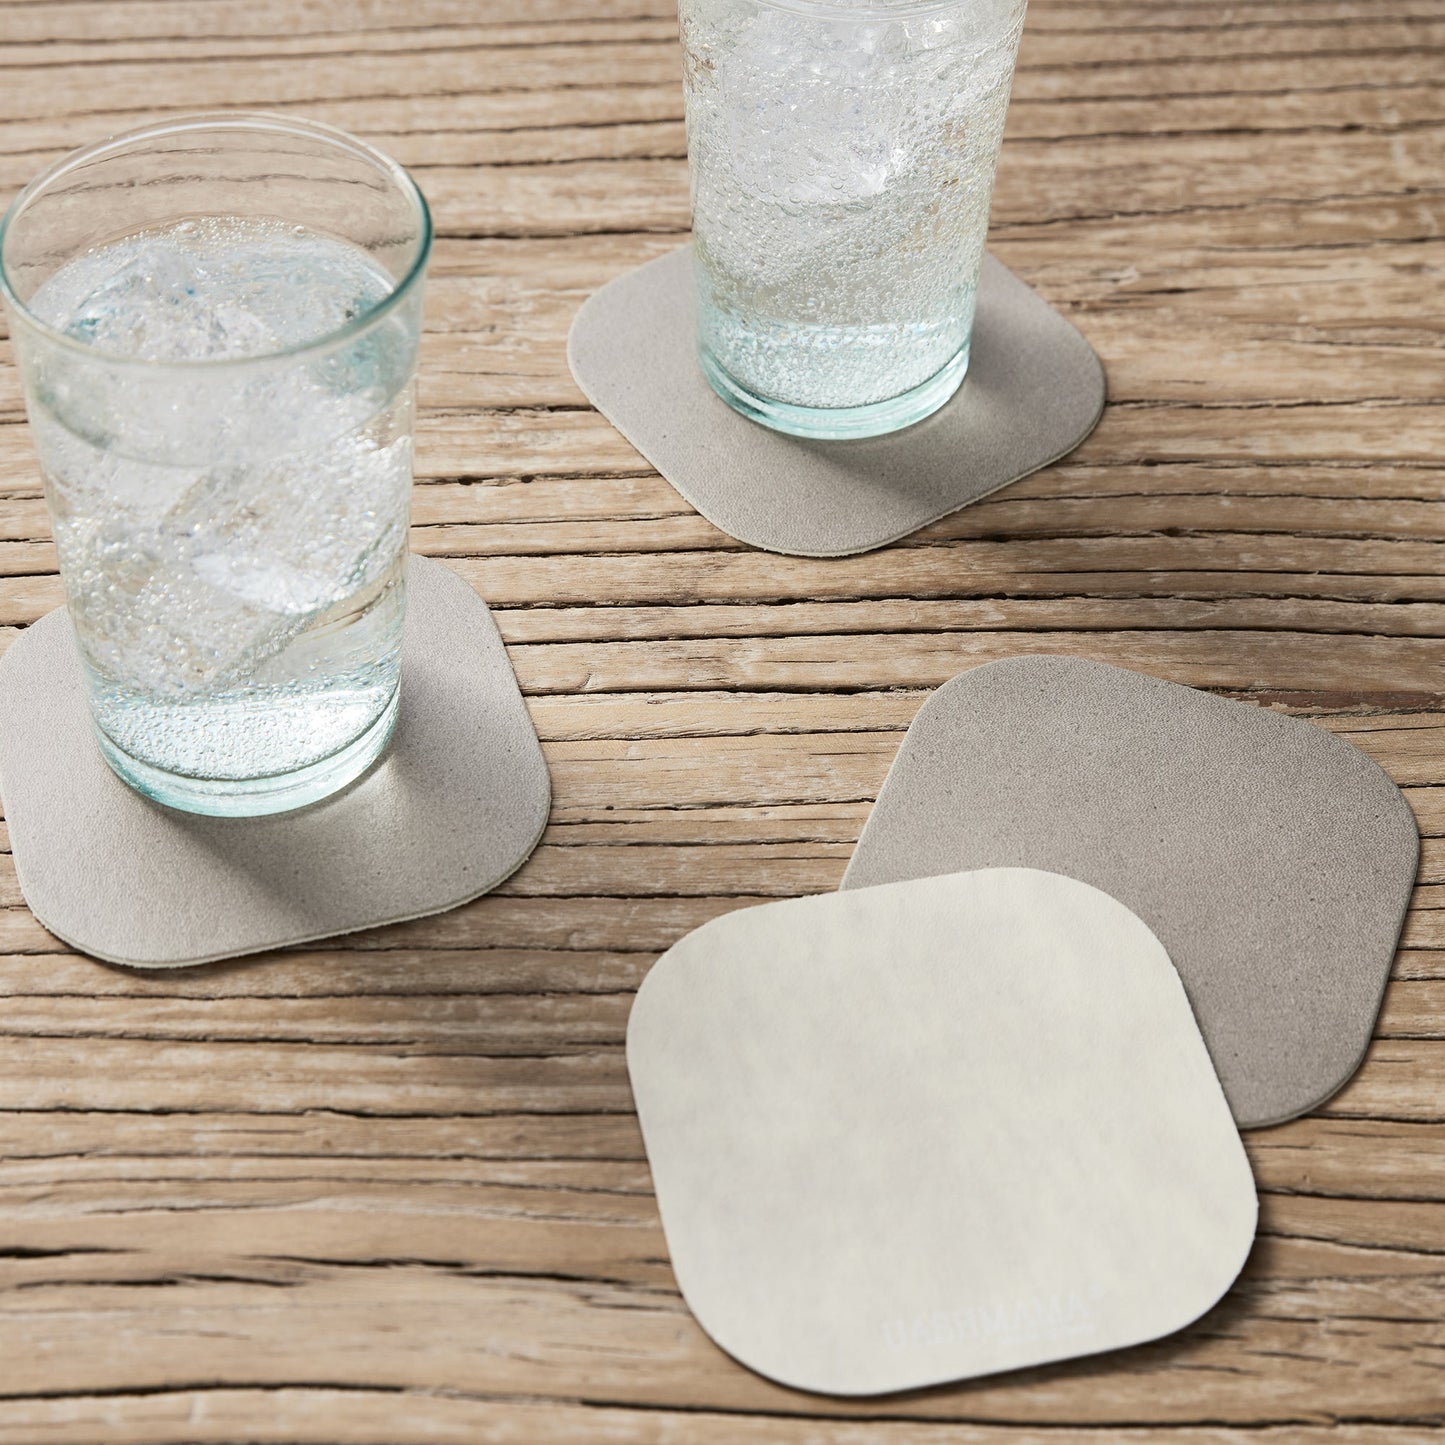 A wooden table is shown with two water glasses sitting atop grey washable paper coasters with rounded edges. At right a beige coaster overlaps another grey washable paper coaster.